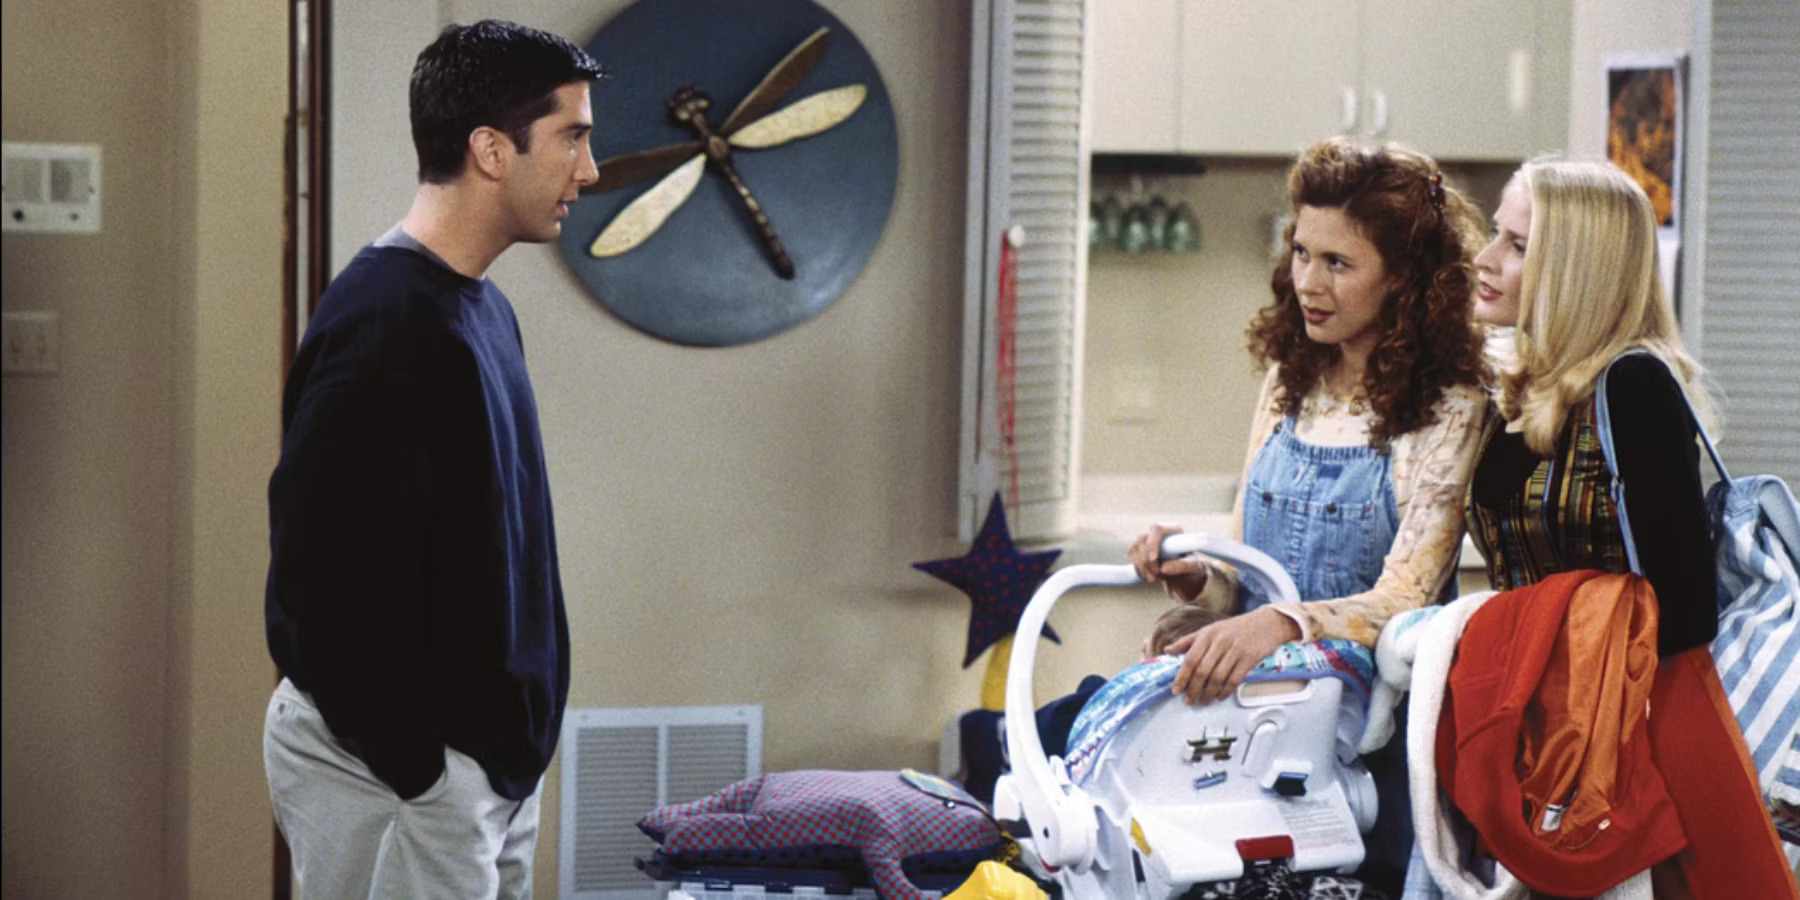 Fans Are Struggling to Watch "Friends" Again: What's Going On?